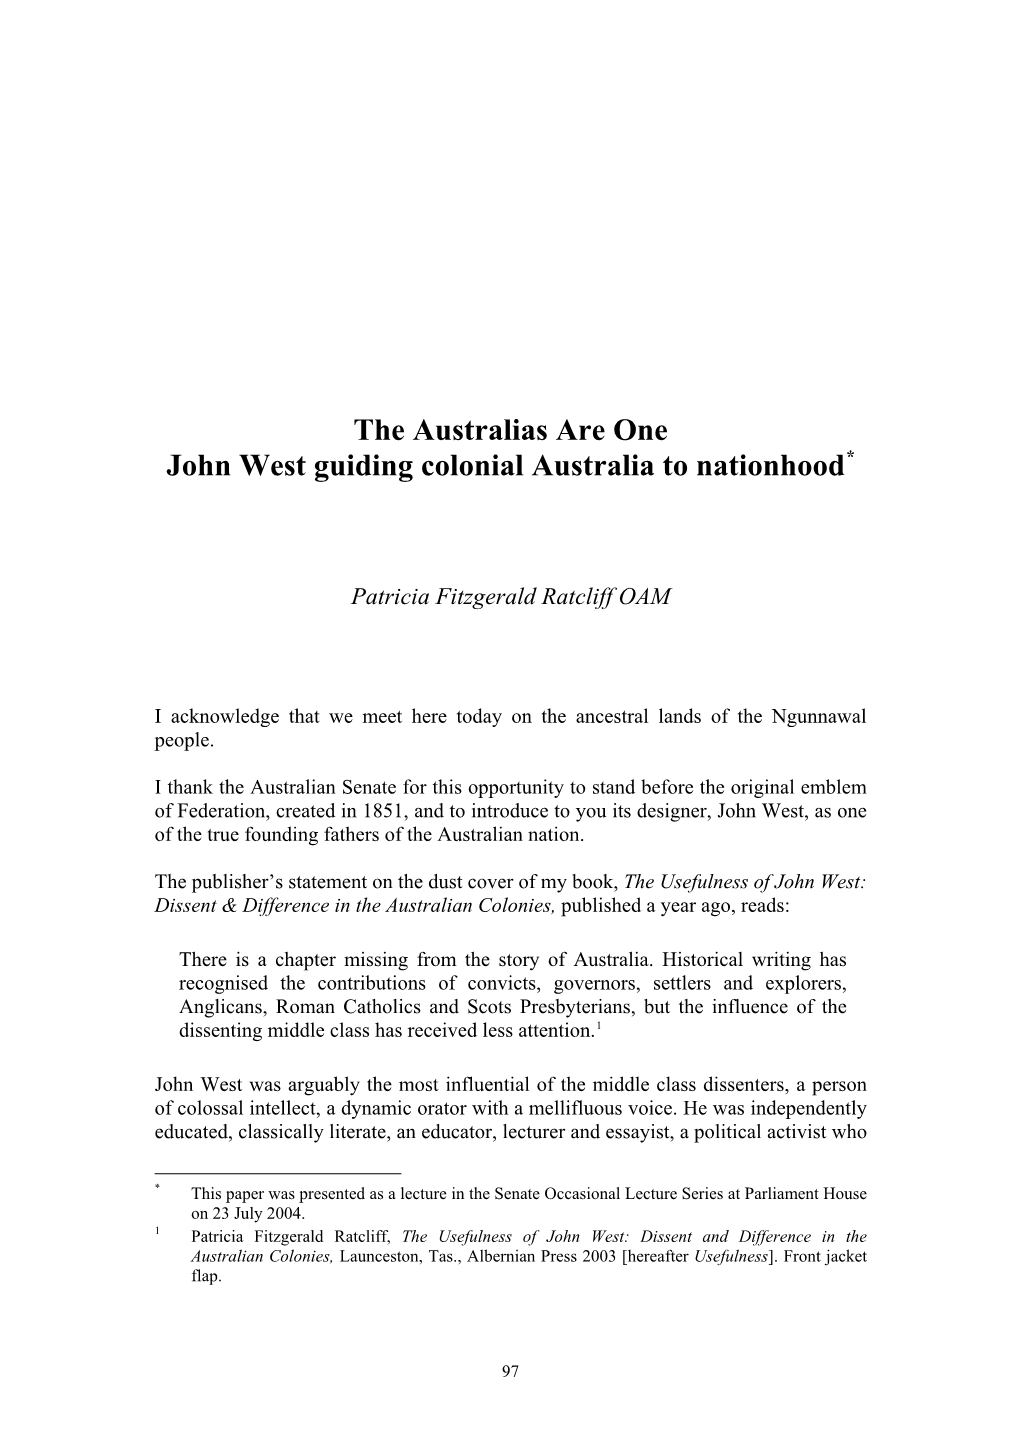 The Australias Are One John West Guiding Colonial Australia to Nationhood*